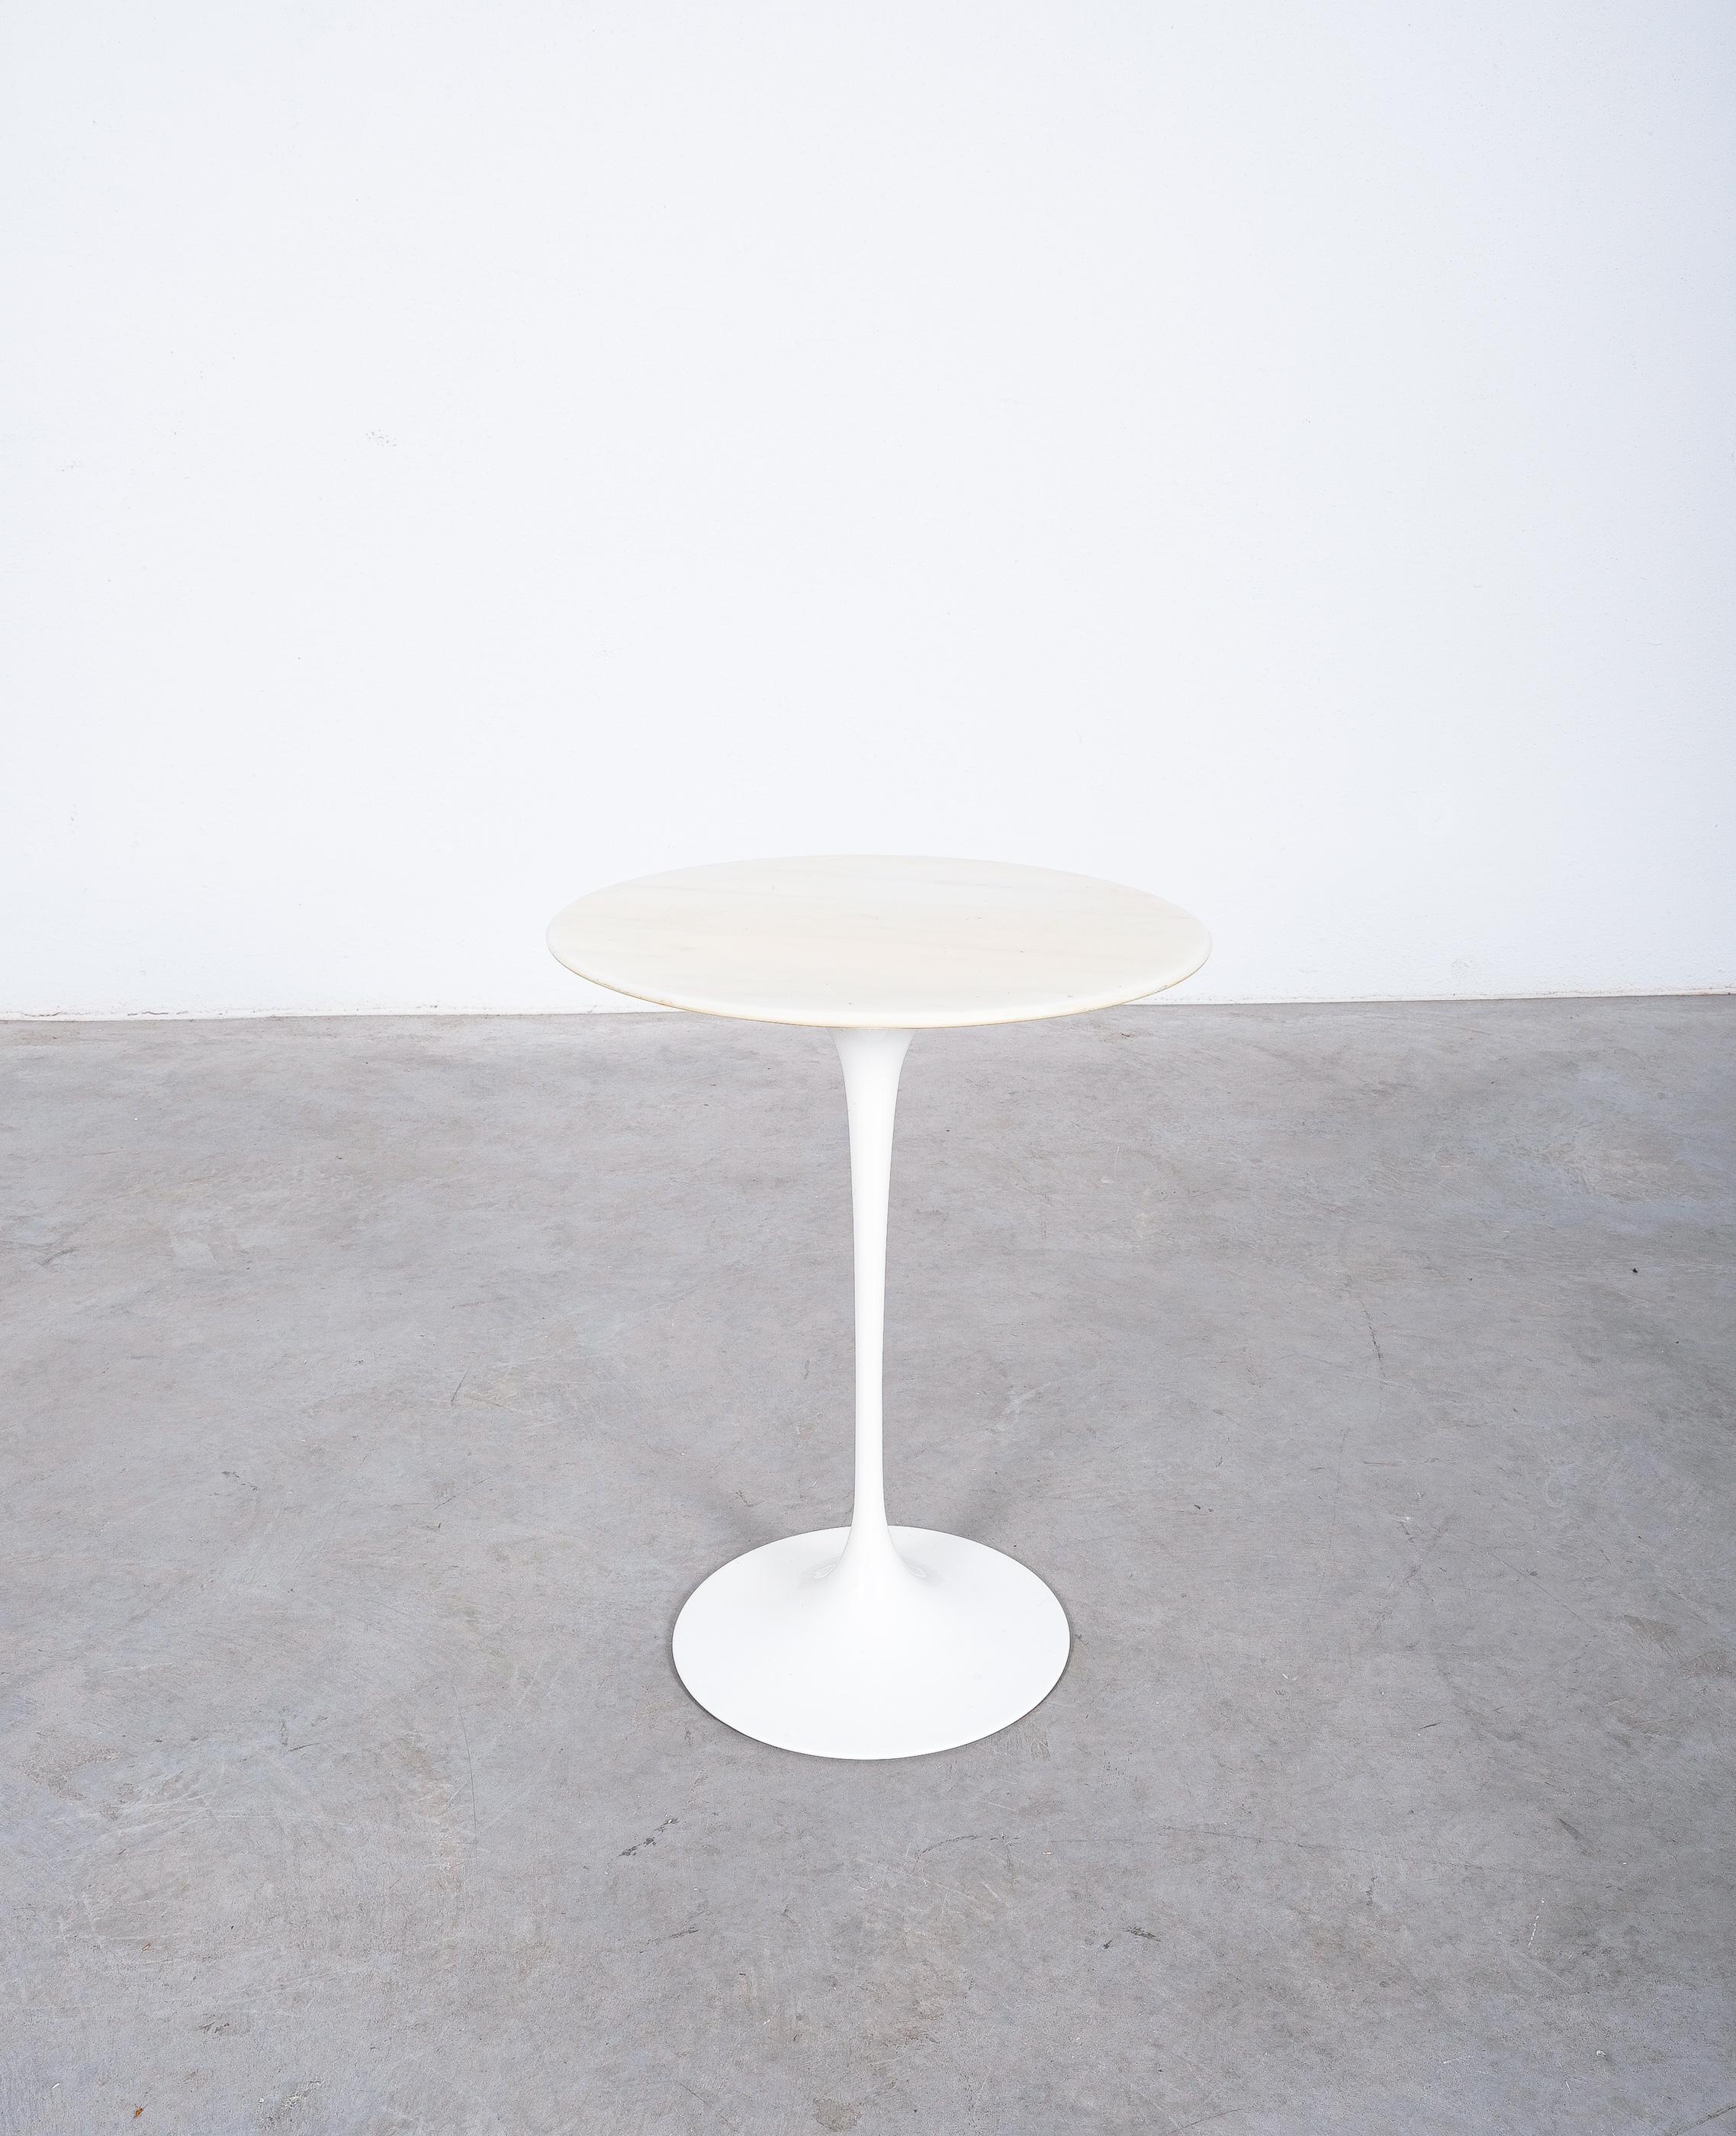 Original side table with a marble top by Saarinen for Knoll International, mid century 

Early version, marked Knoll International

Elegant side table designed by the architect Eero Saarinen in very good original vintage condition featuring a